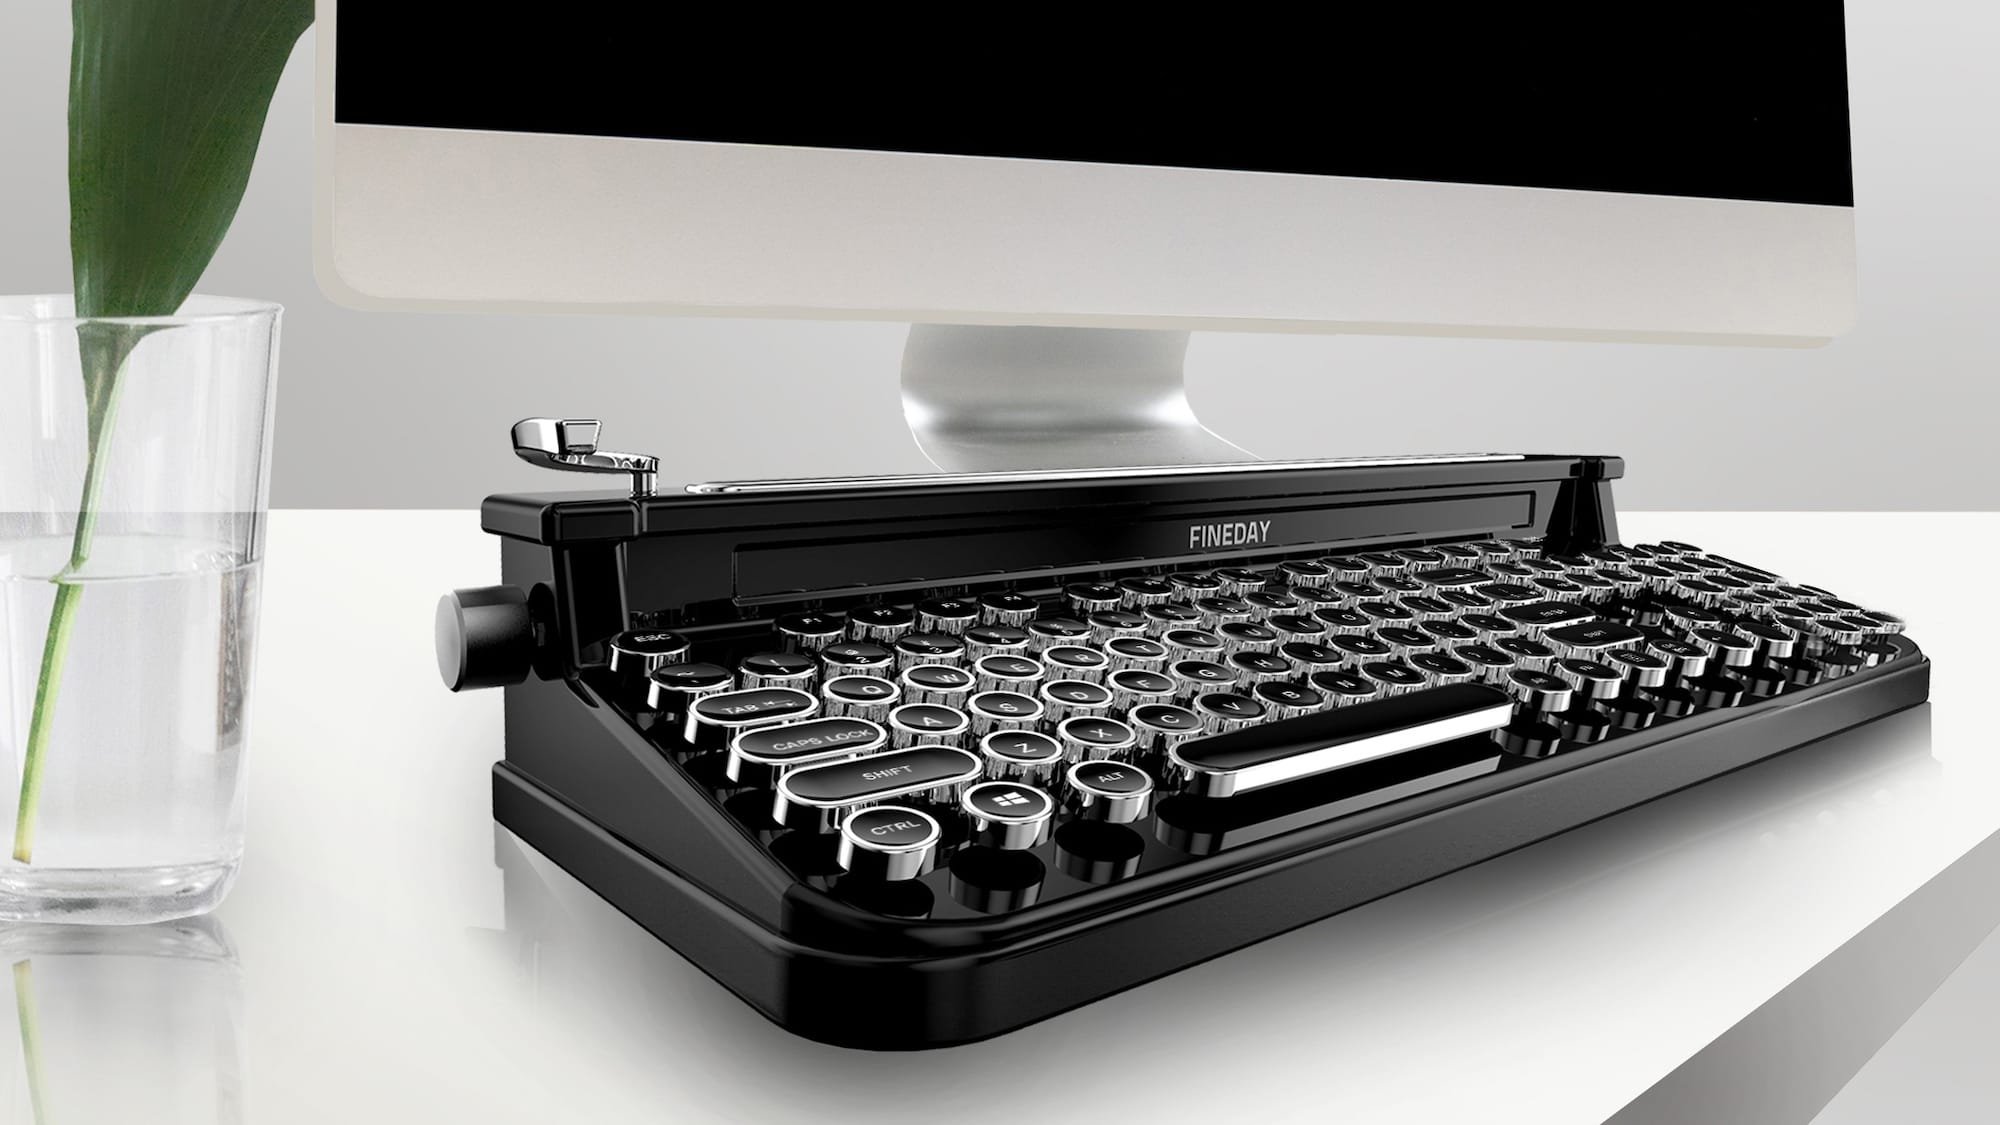 Fineday Retro Bluetooth Typewriter Keyboard pairs with up to three devices